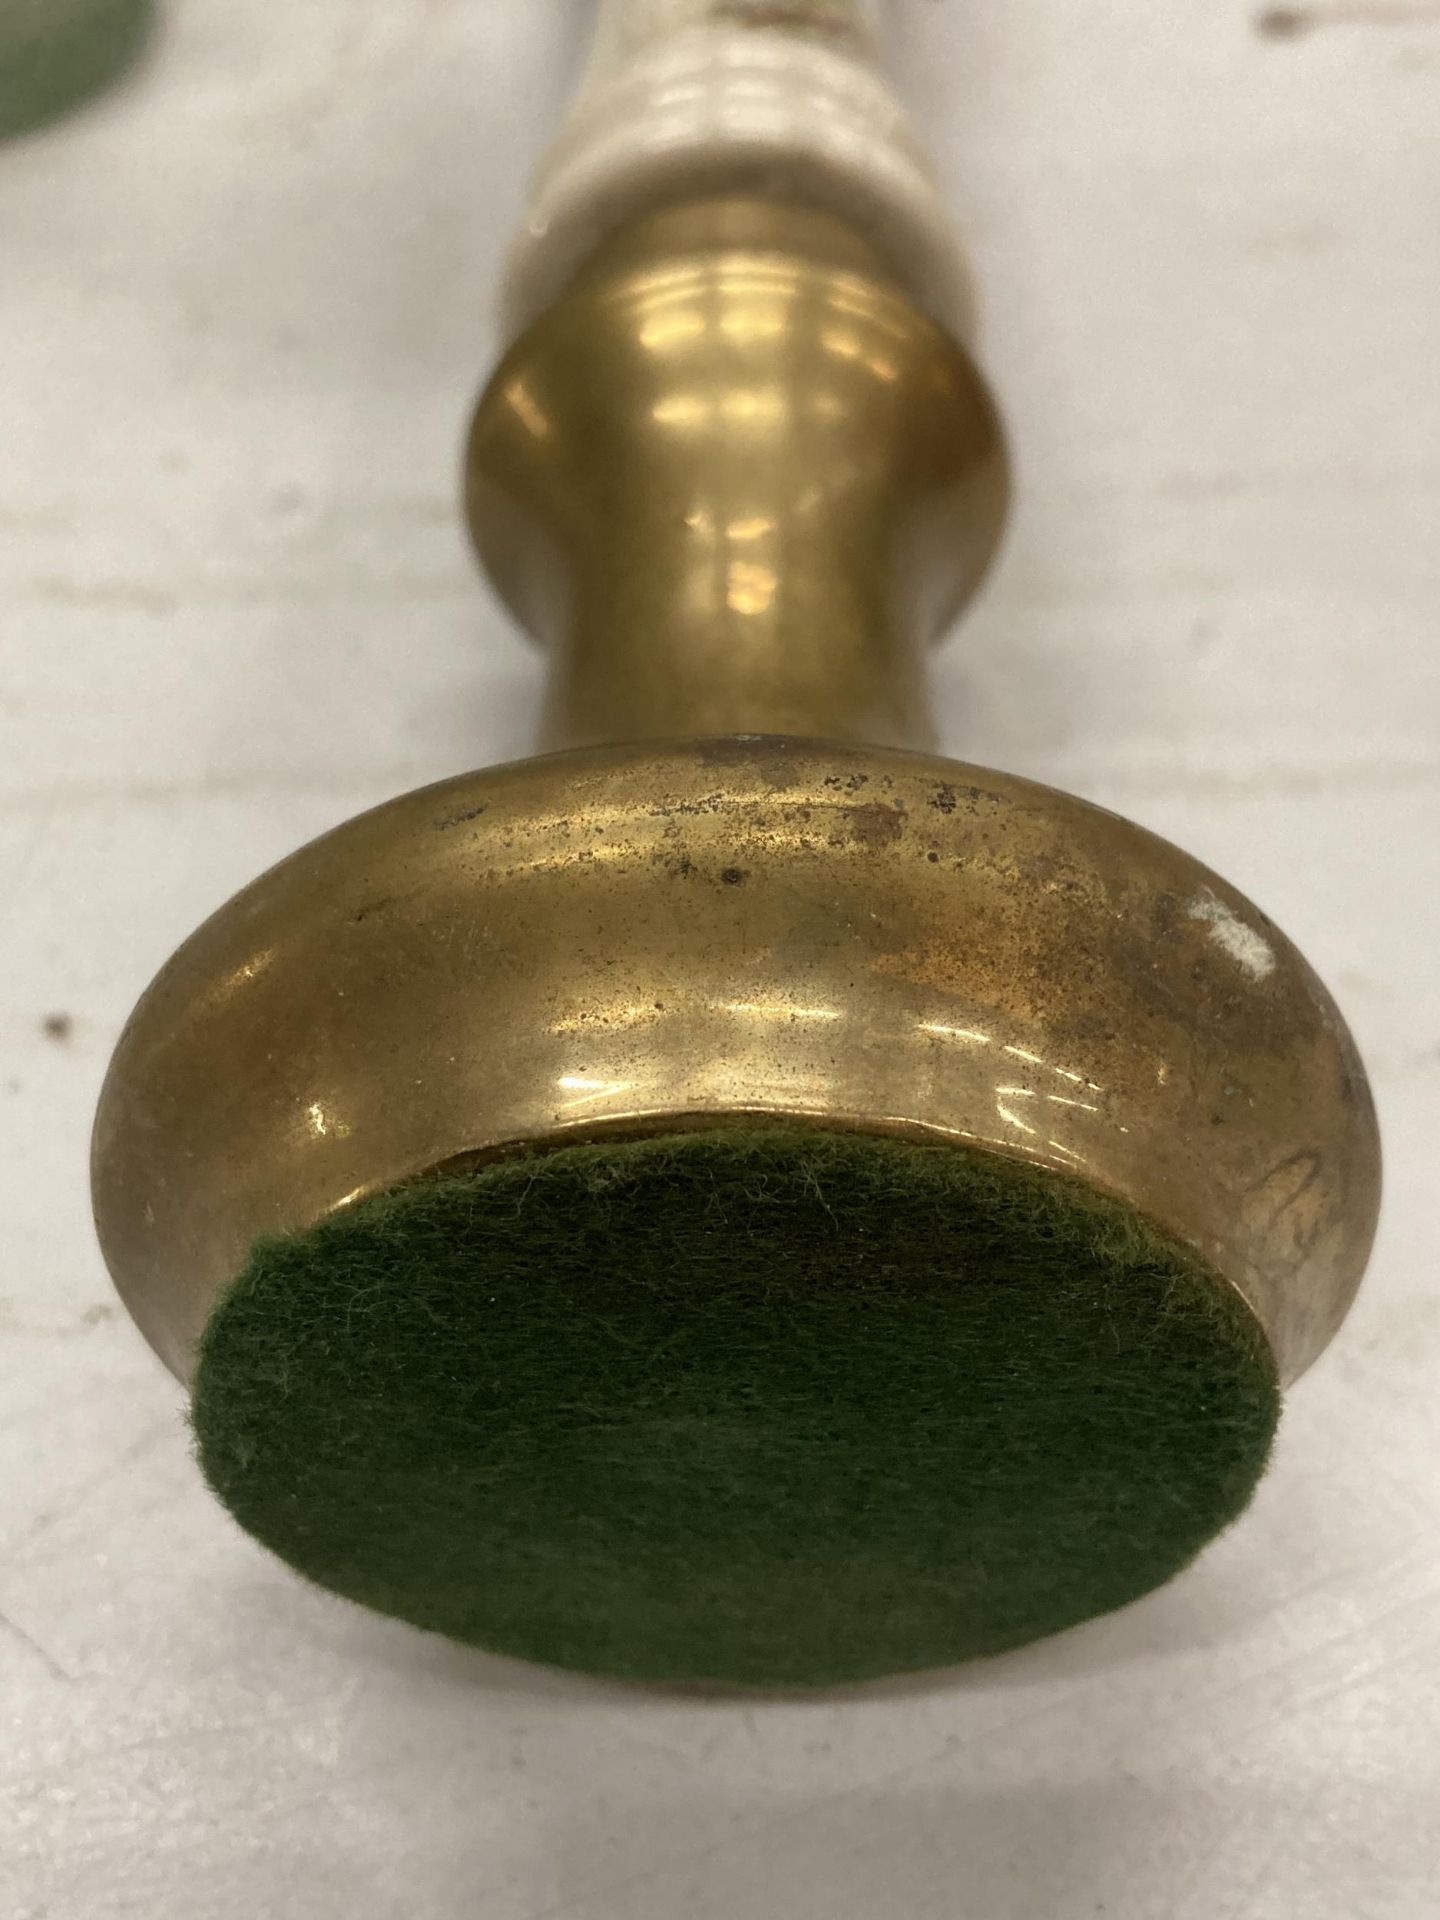 A VERY HEAVY SOLID BRASS AND CERAMIC HUNTSMAN PUMP - Image 2 of 2